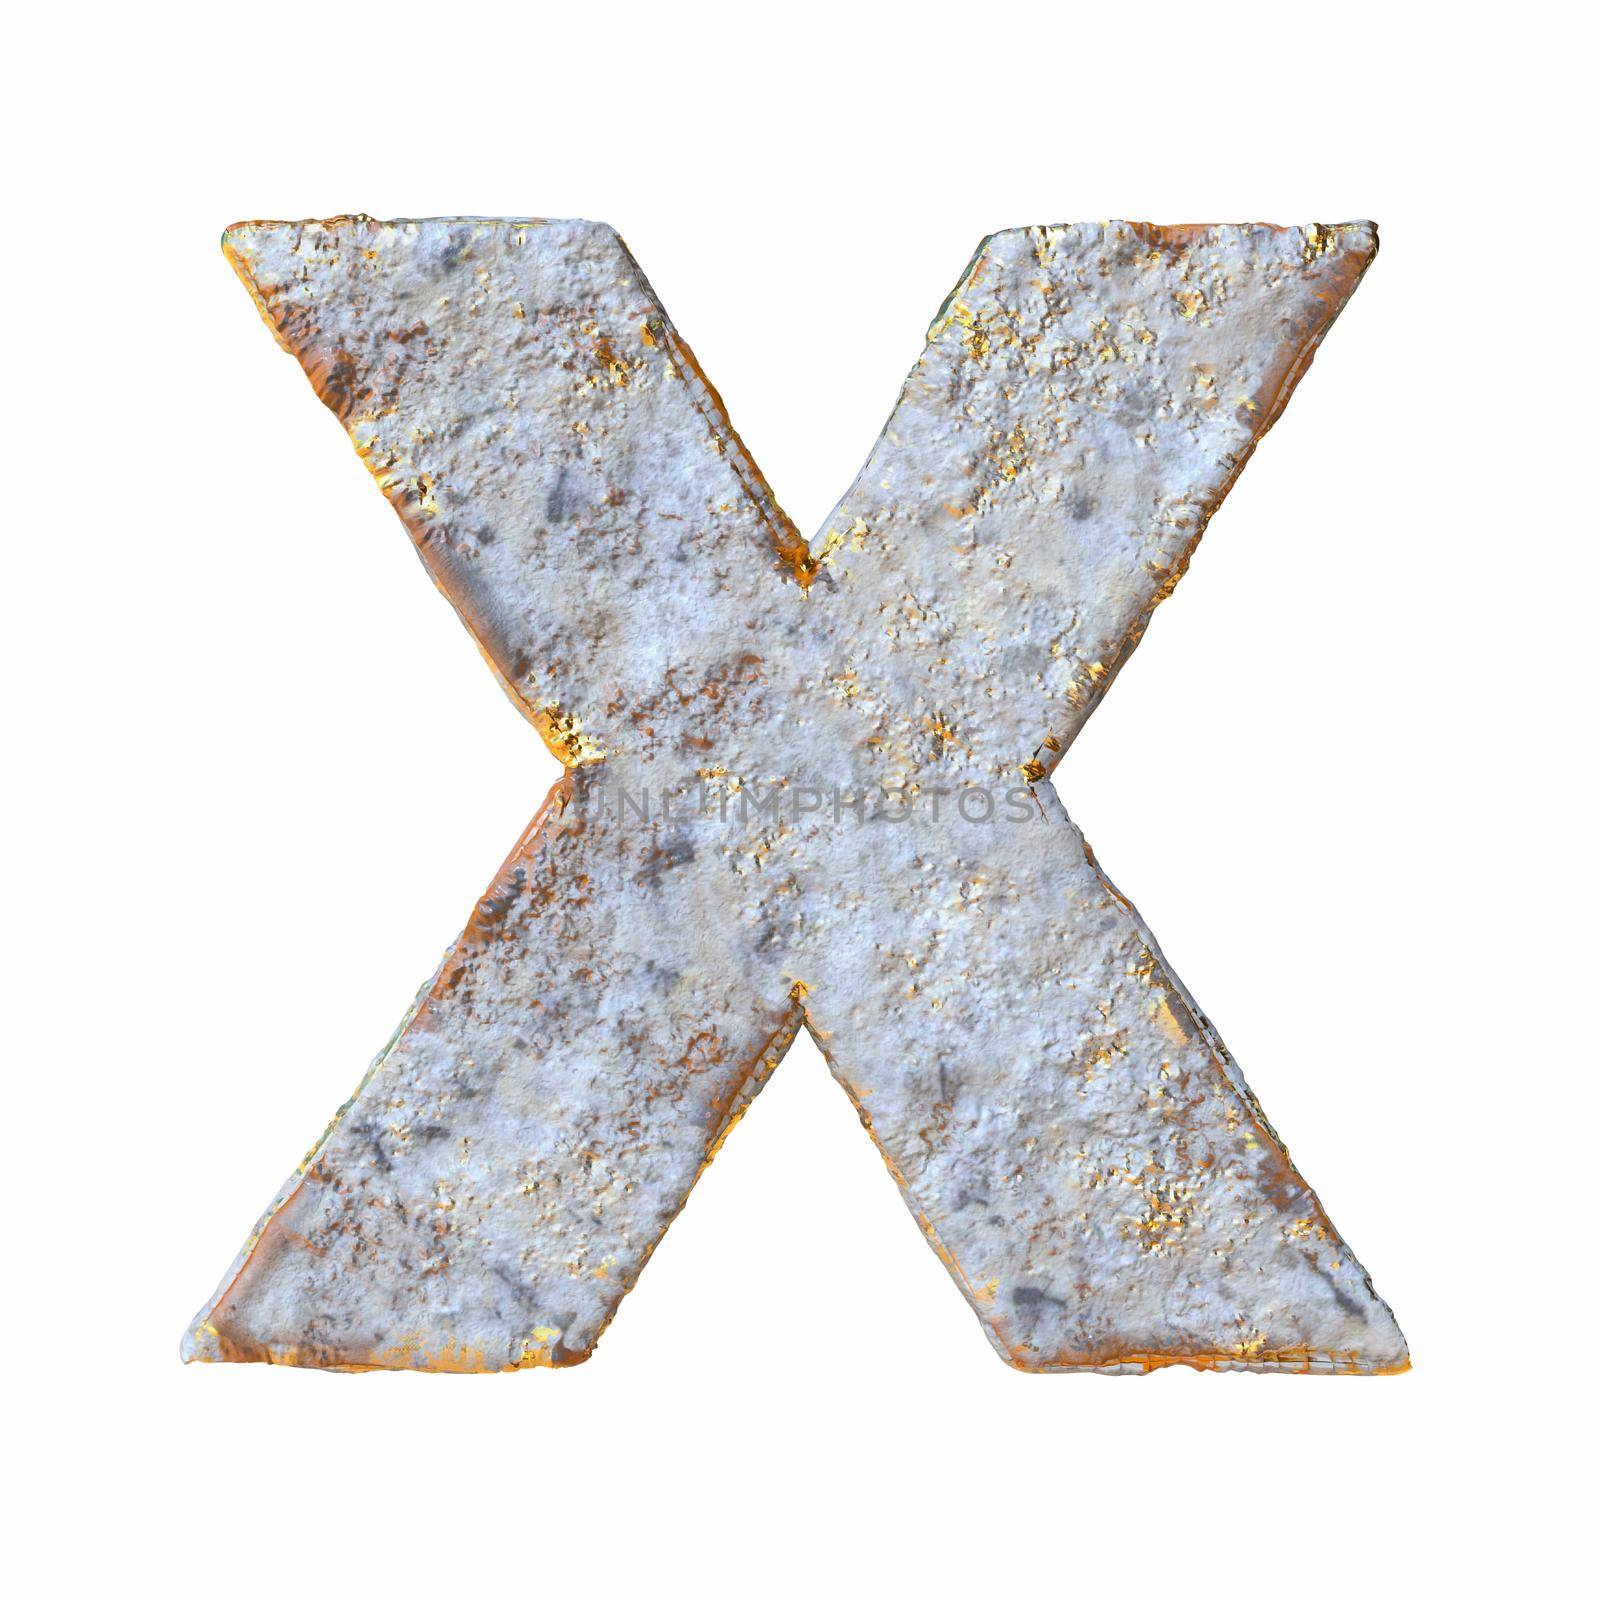 Stone with golden metal particles Letter X 3D rendering illustration isolated on white background